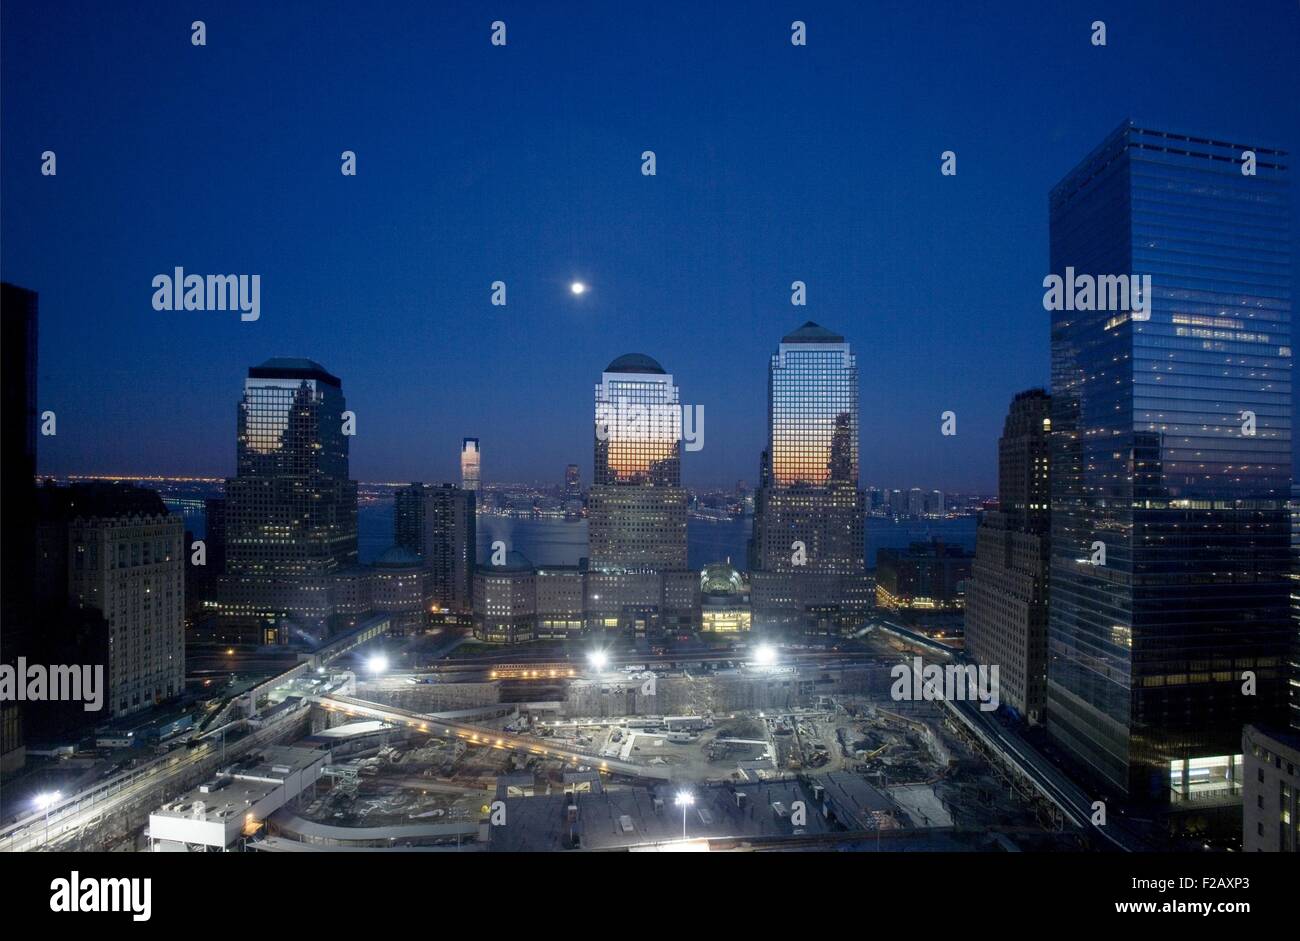 Night view of the 16 acre World Trade Center site under reconstruction. View is to the West, with three buildings of the World Financial Center, the Hudson River and in the distance, New Jersey. Photo by Carol Highsmith. (BSLOC 2015 2 127) Stock Photo